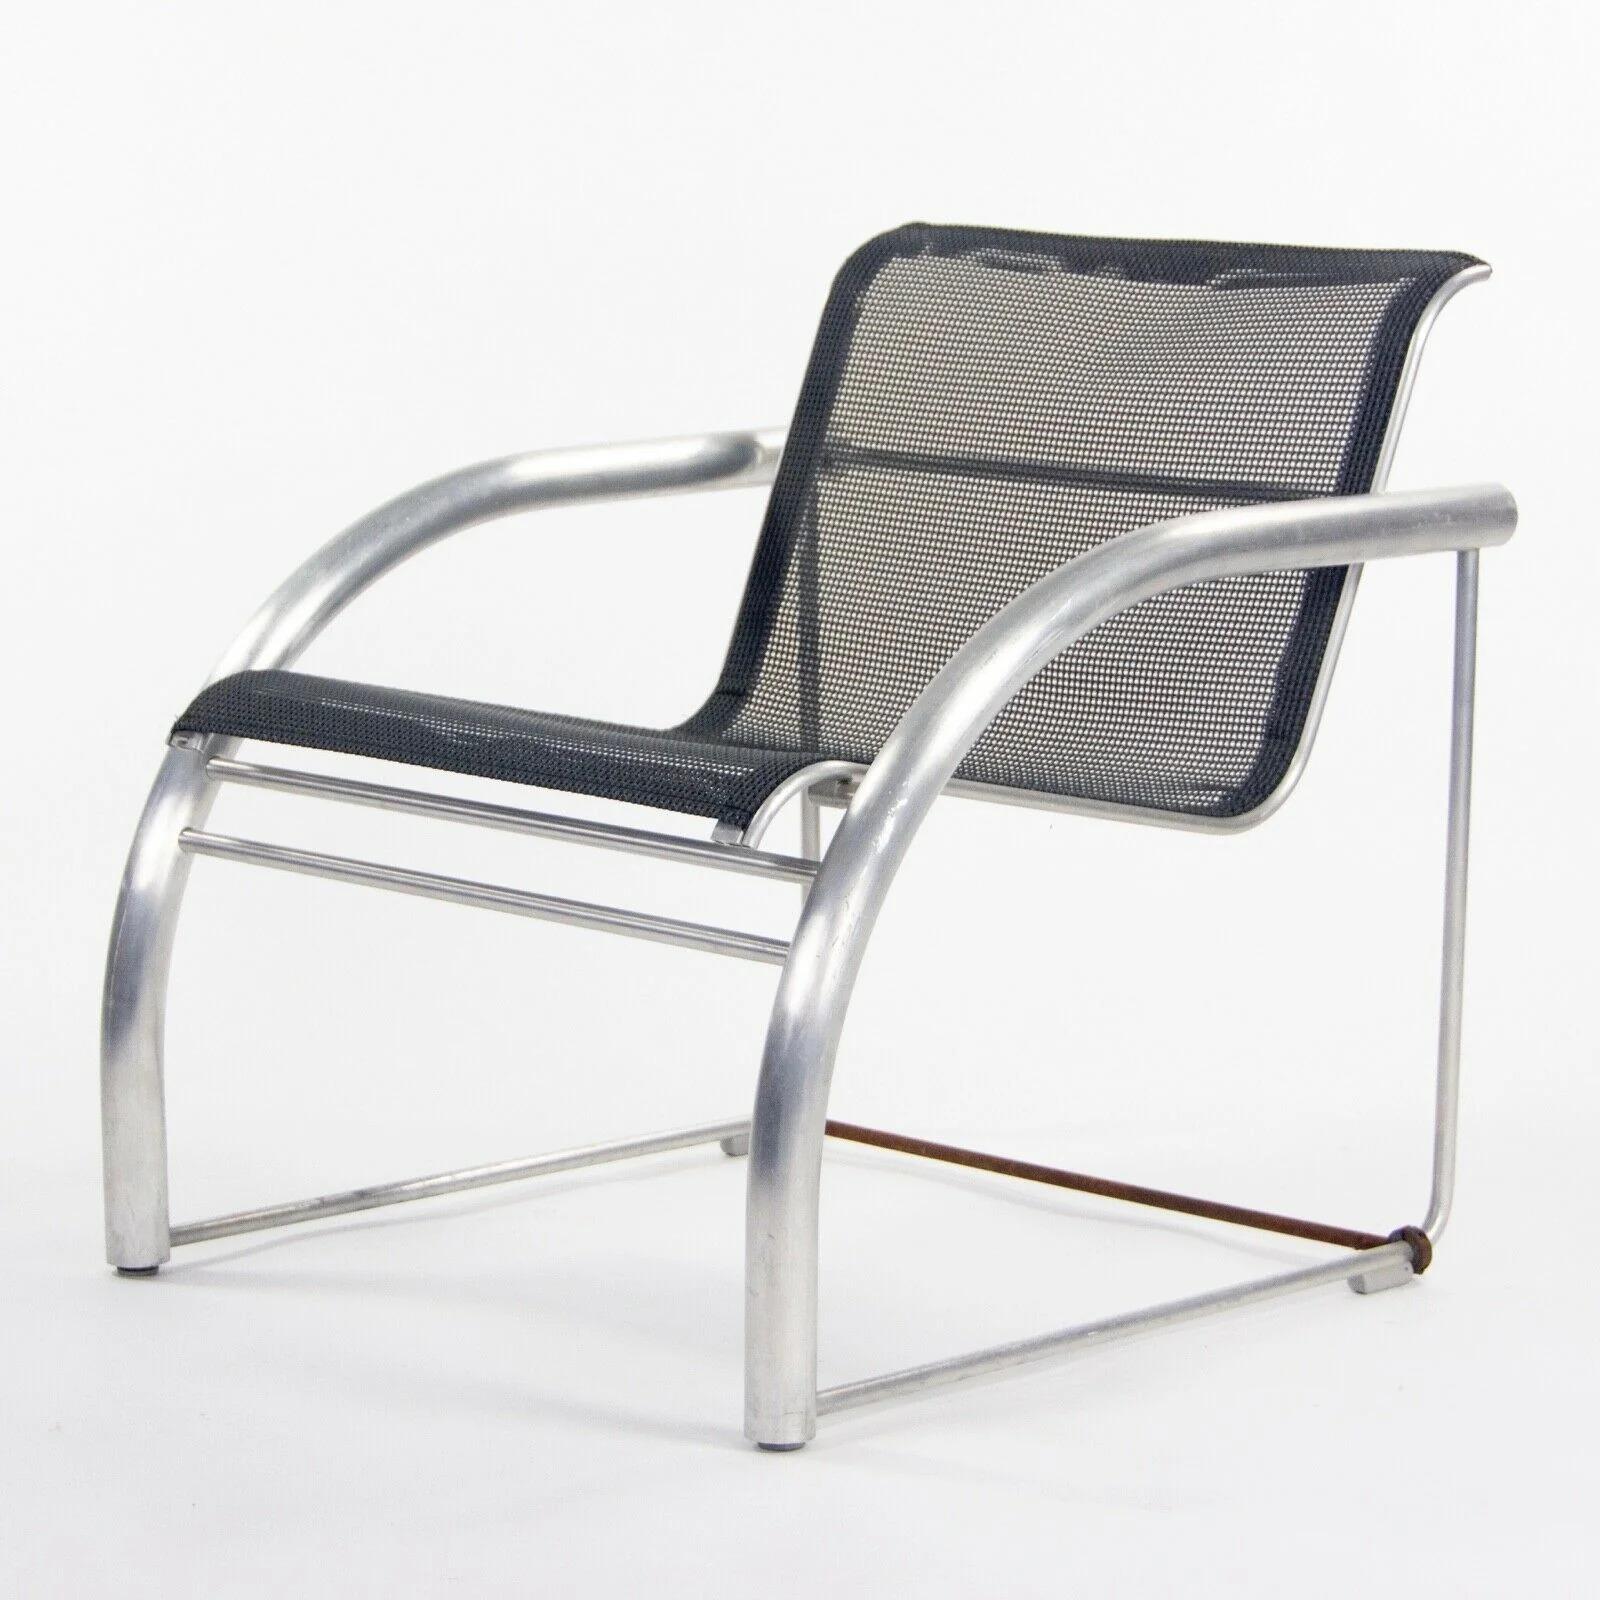 2011 Prototype Richard Schultz Mateo Collection Raw Aluminum & Mesh Dining Chair For Sale 2